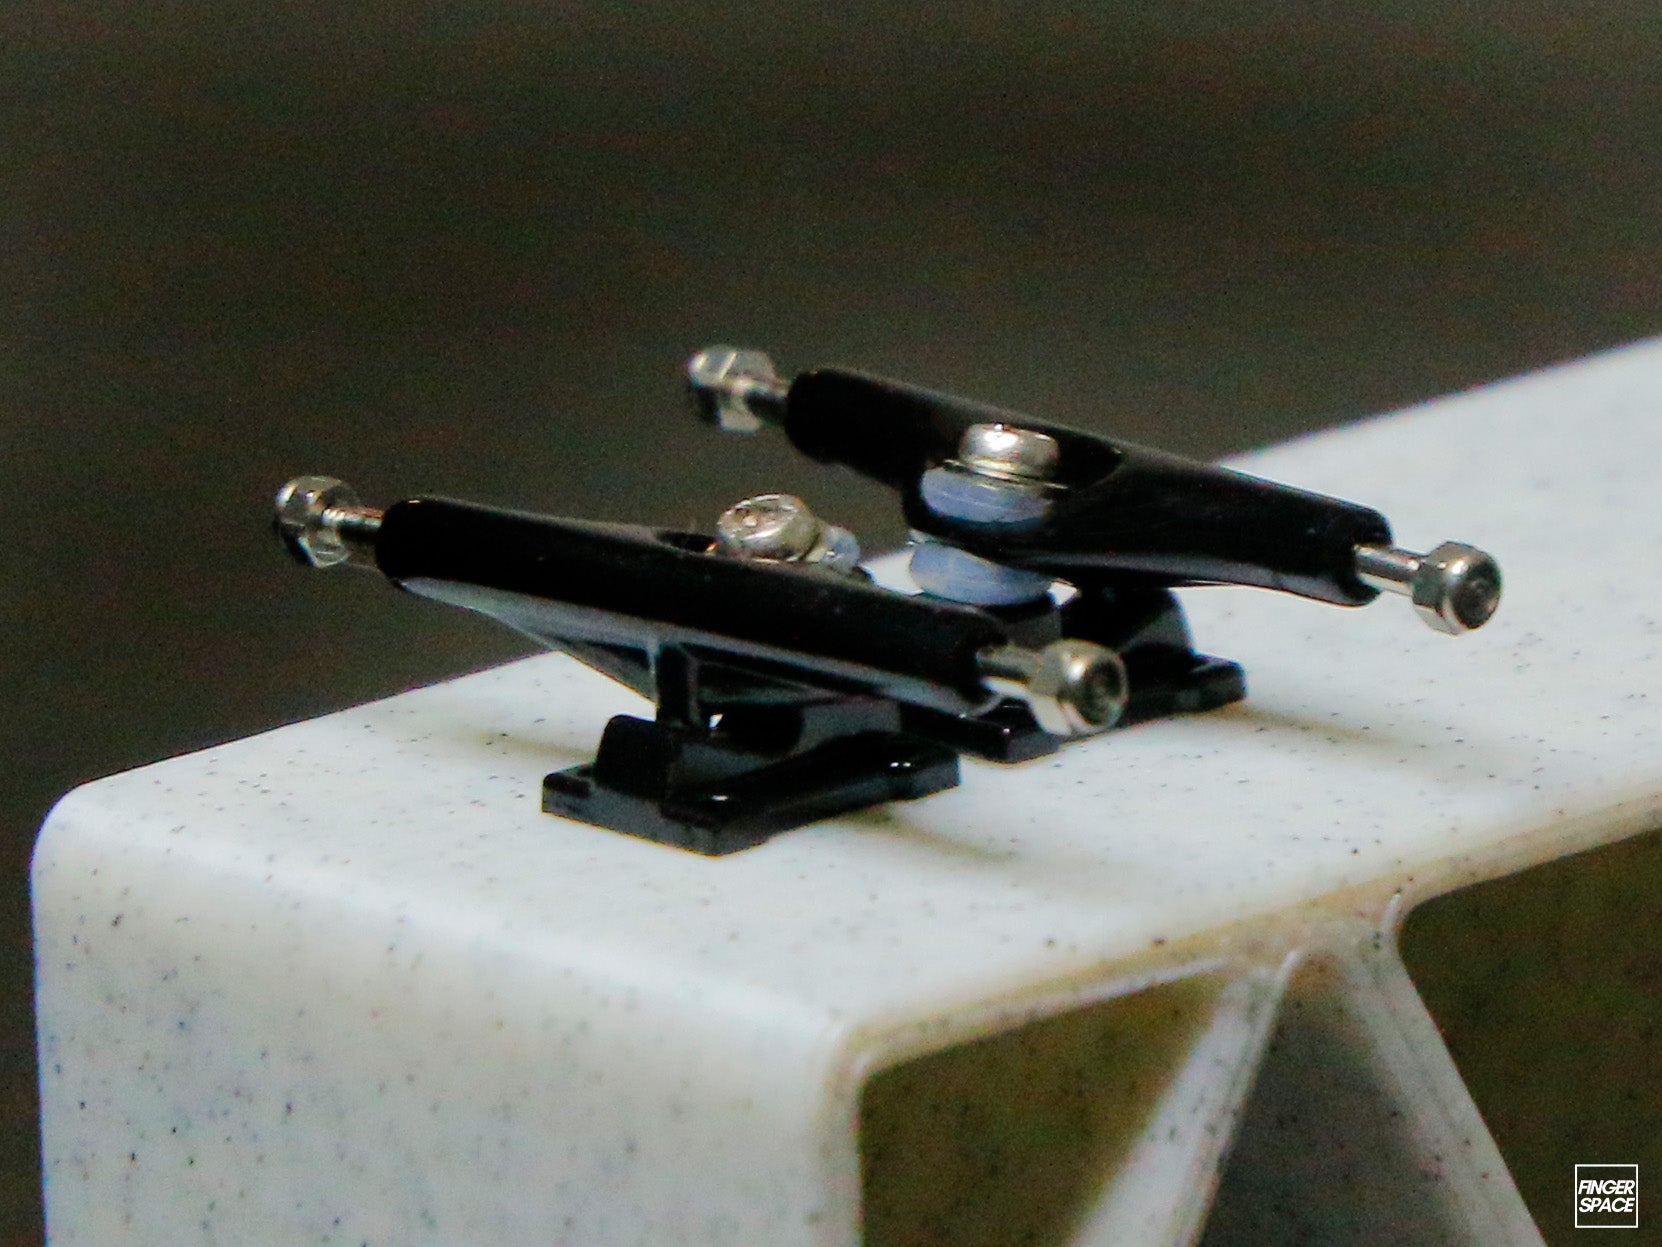 34mm Olympus Pro Fingerboard Trucks - "Hades" Black Colorway with Inverted Kingpins